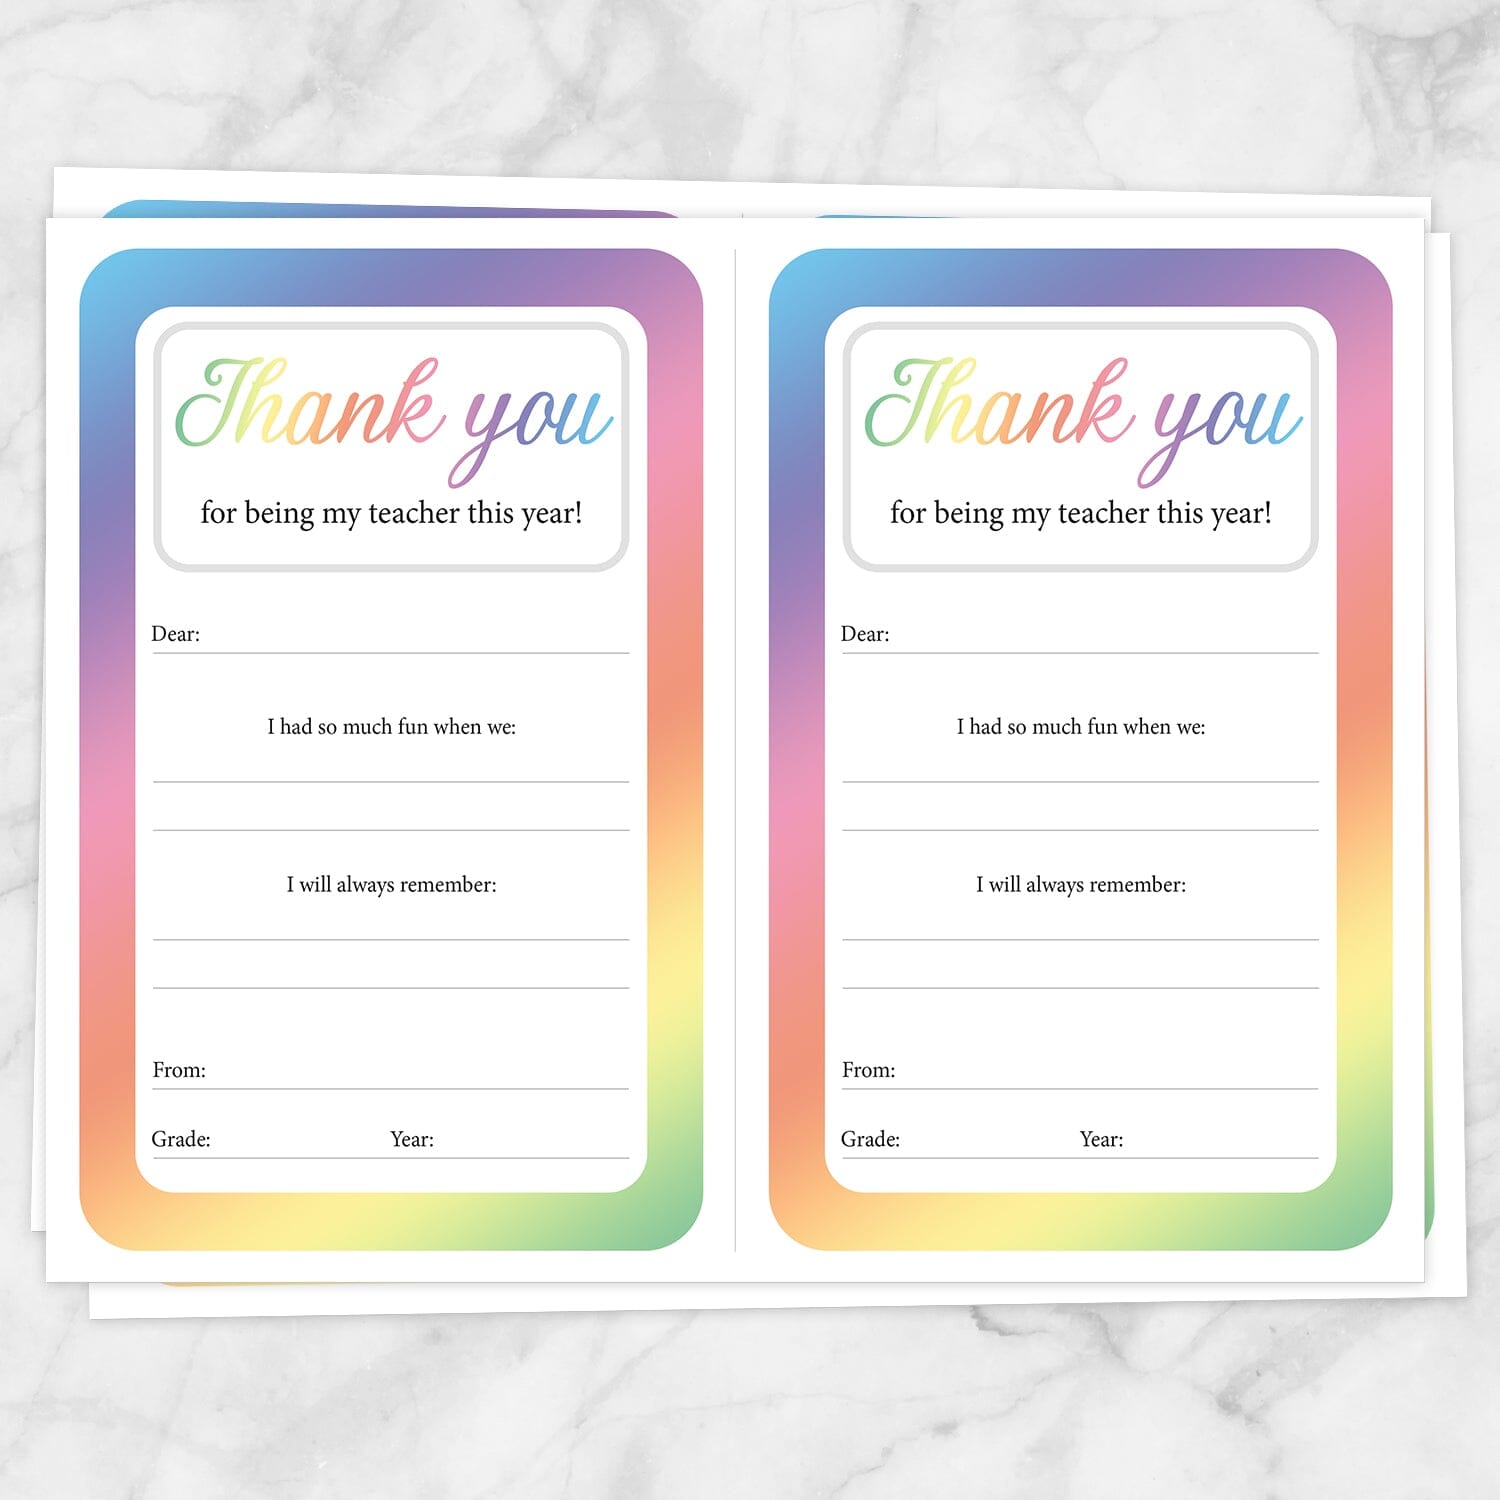 Printable Colorful Teacher Thank You Notes at Printable Planning. Sheet of 2 thank you notes.